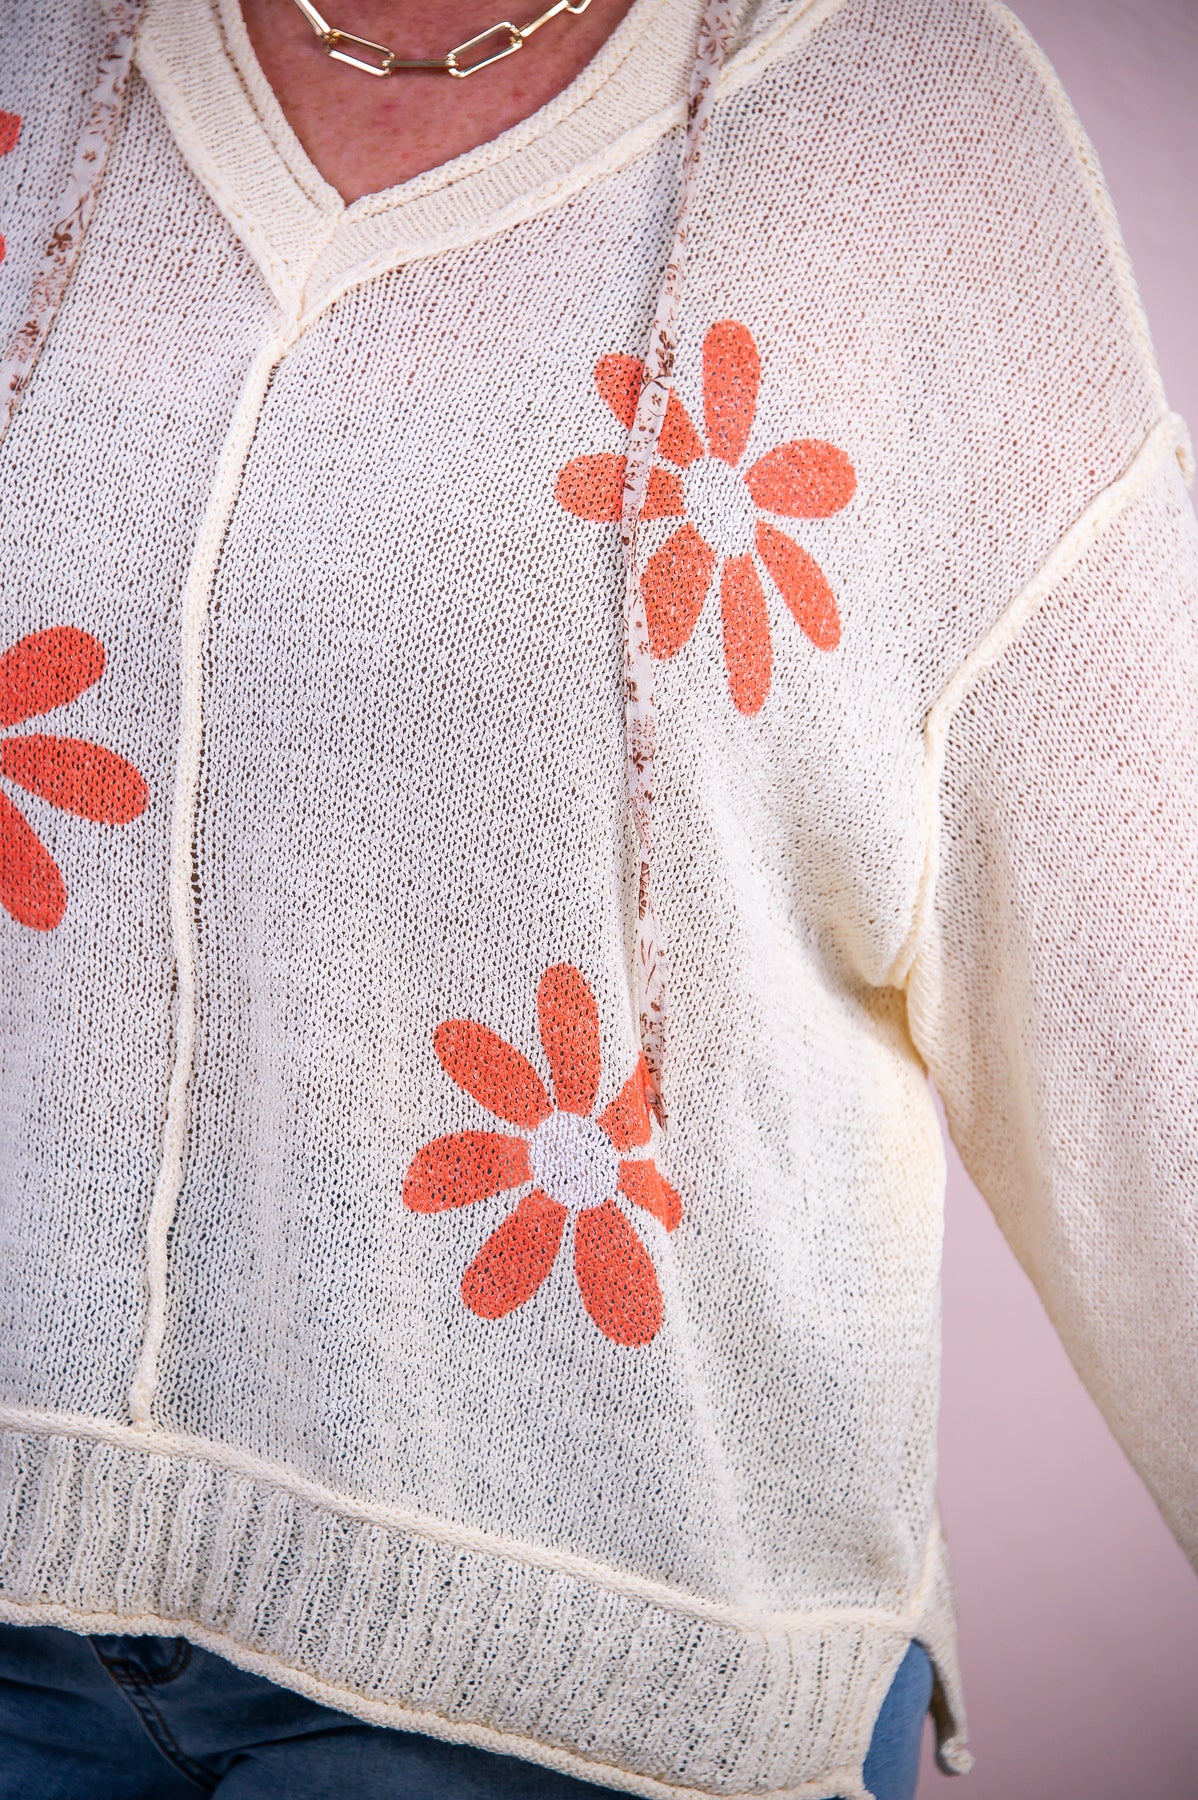 Loving These Rainy Days Cream/Orange Floral Hooded Top - T9326CR